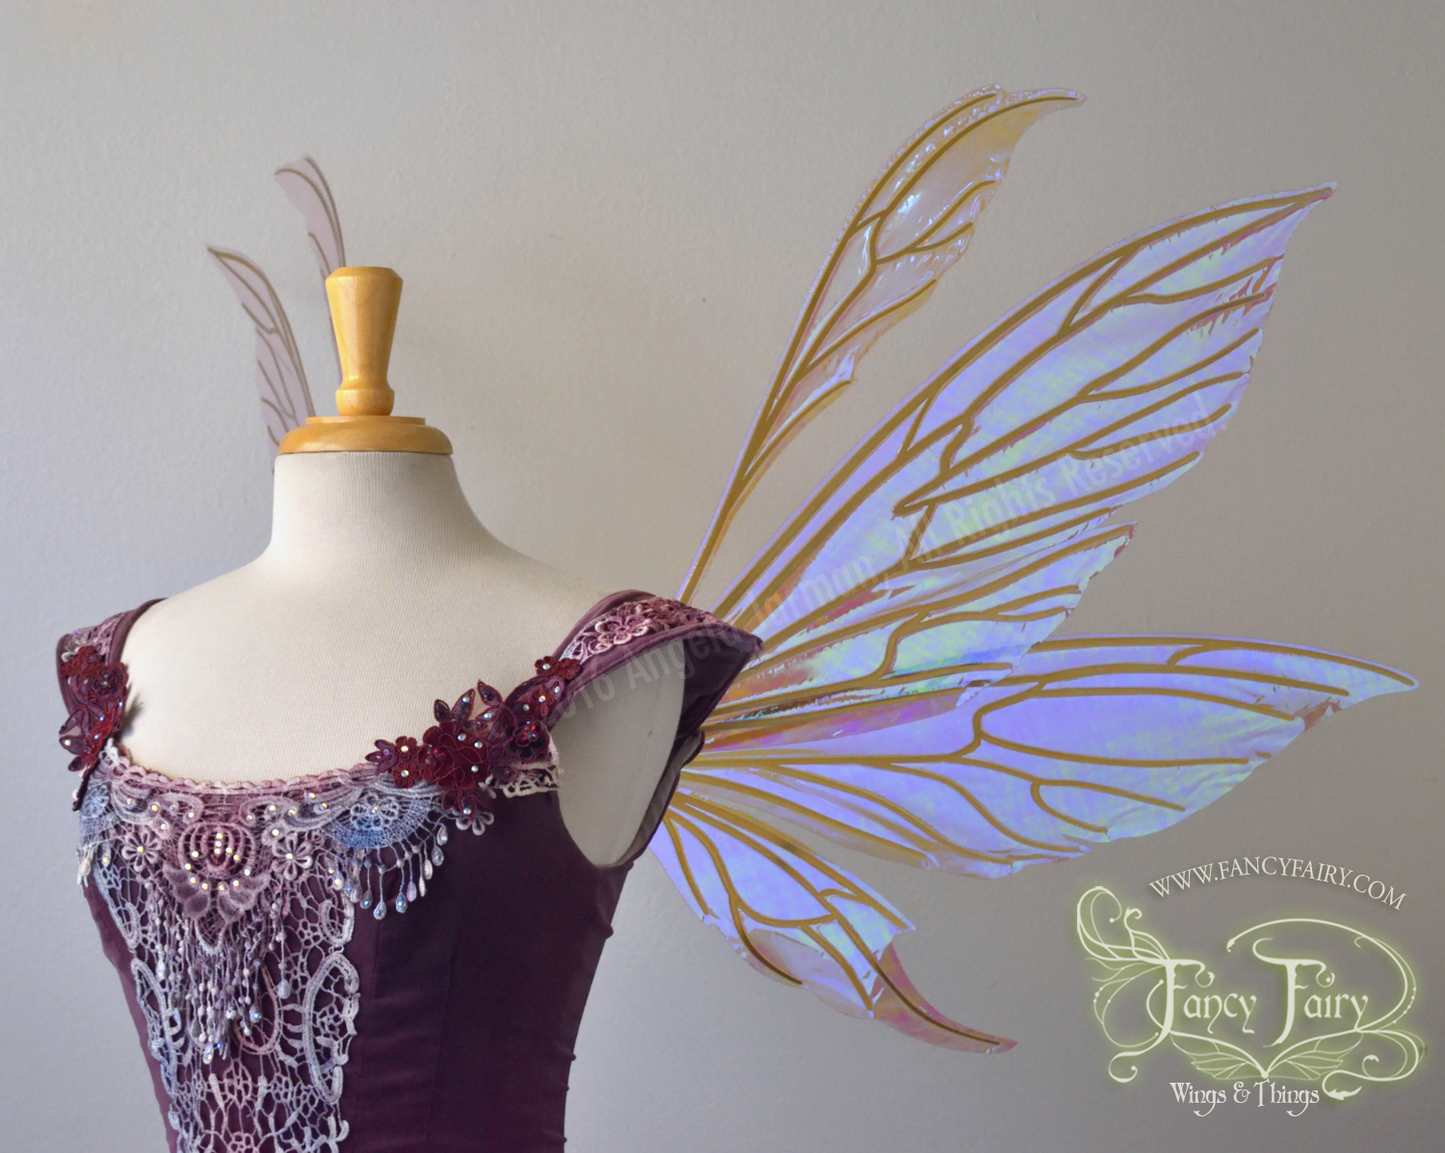 Made to Order Aynia Iridescent Fairy Wings in your choice of color!